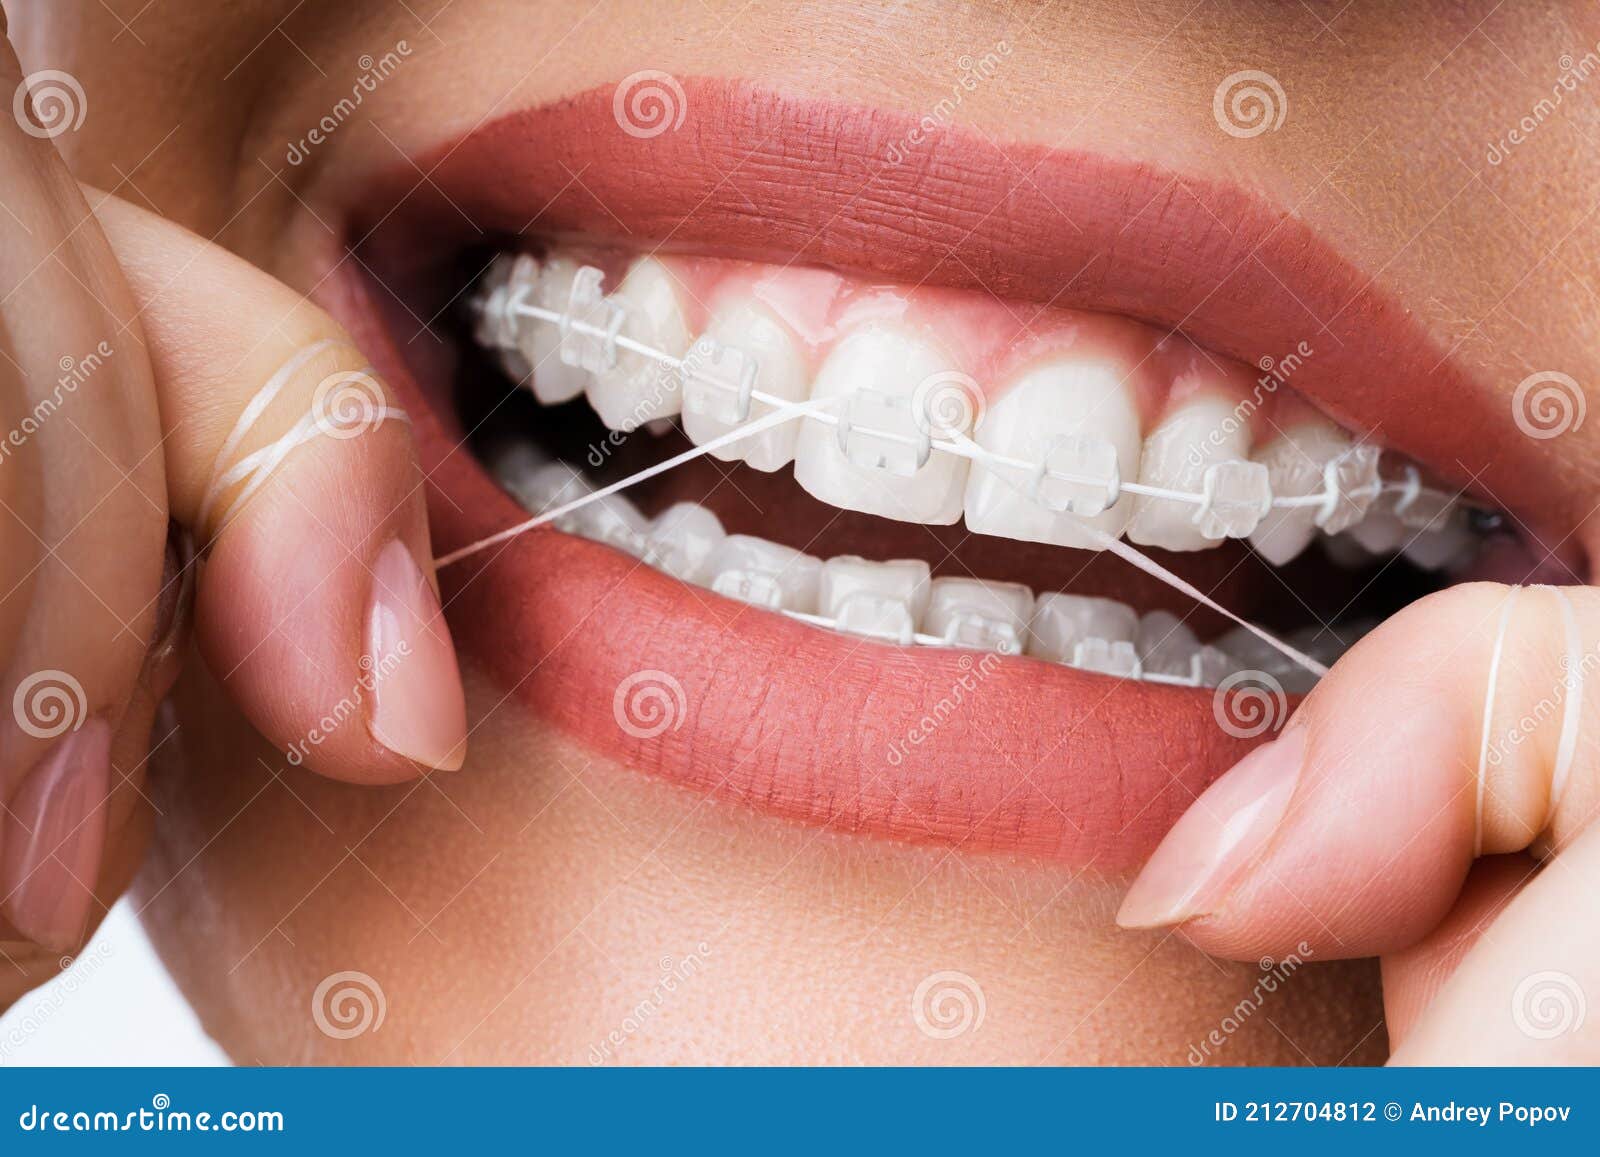 female cleaning dental brackets in mouth